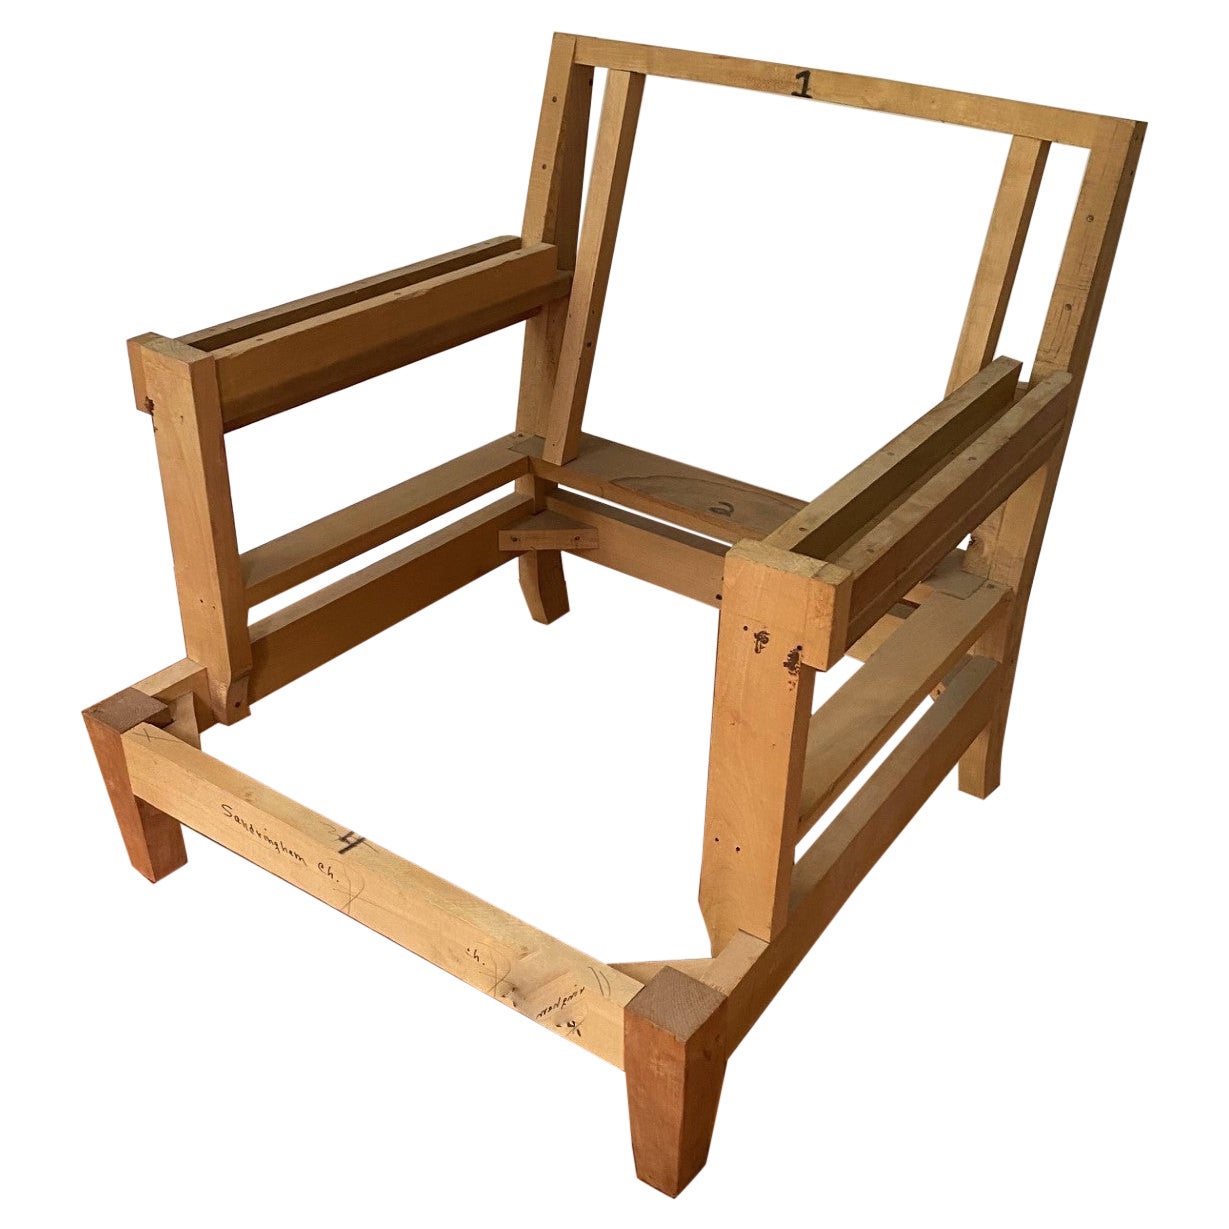 New Kiln-Dried Maple Lawson Style Lounge Chair Frame with Mahogany Legs. For Sale